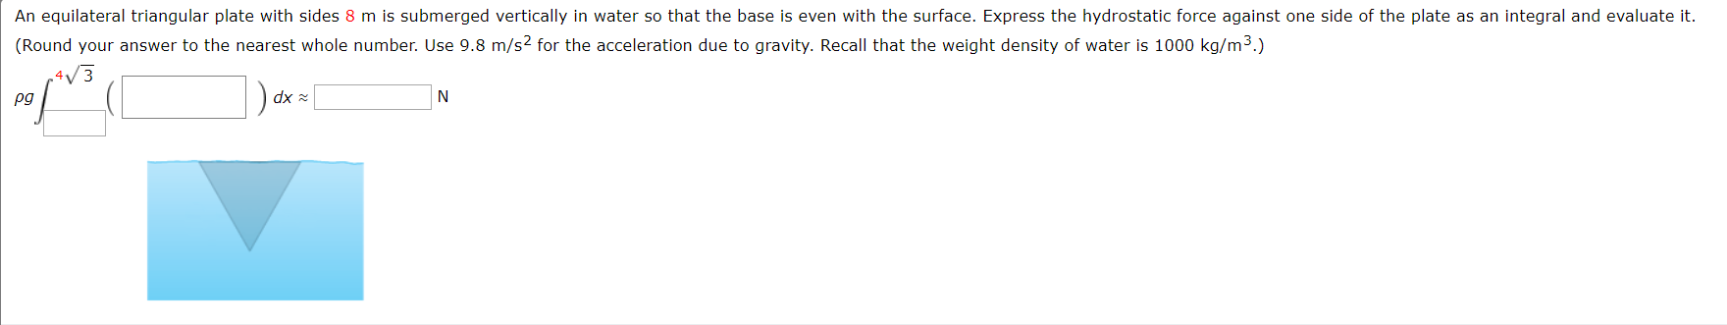 An equilateral triangular plate with sides 8 m is submerged vertically in water so that the base is even with the surface. Express the hydrostatic force against one side of the plate as an integral and evaluate it.
(Round your answer to the nearest whole number. Use 9.8 m/s2 for the acceleration due to gravity. Recall that the weight density of water is 1000 kg/m3.)
|
4/3
dx
N
pg
